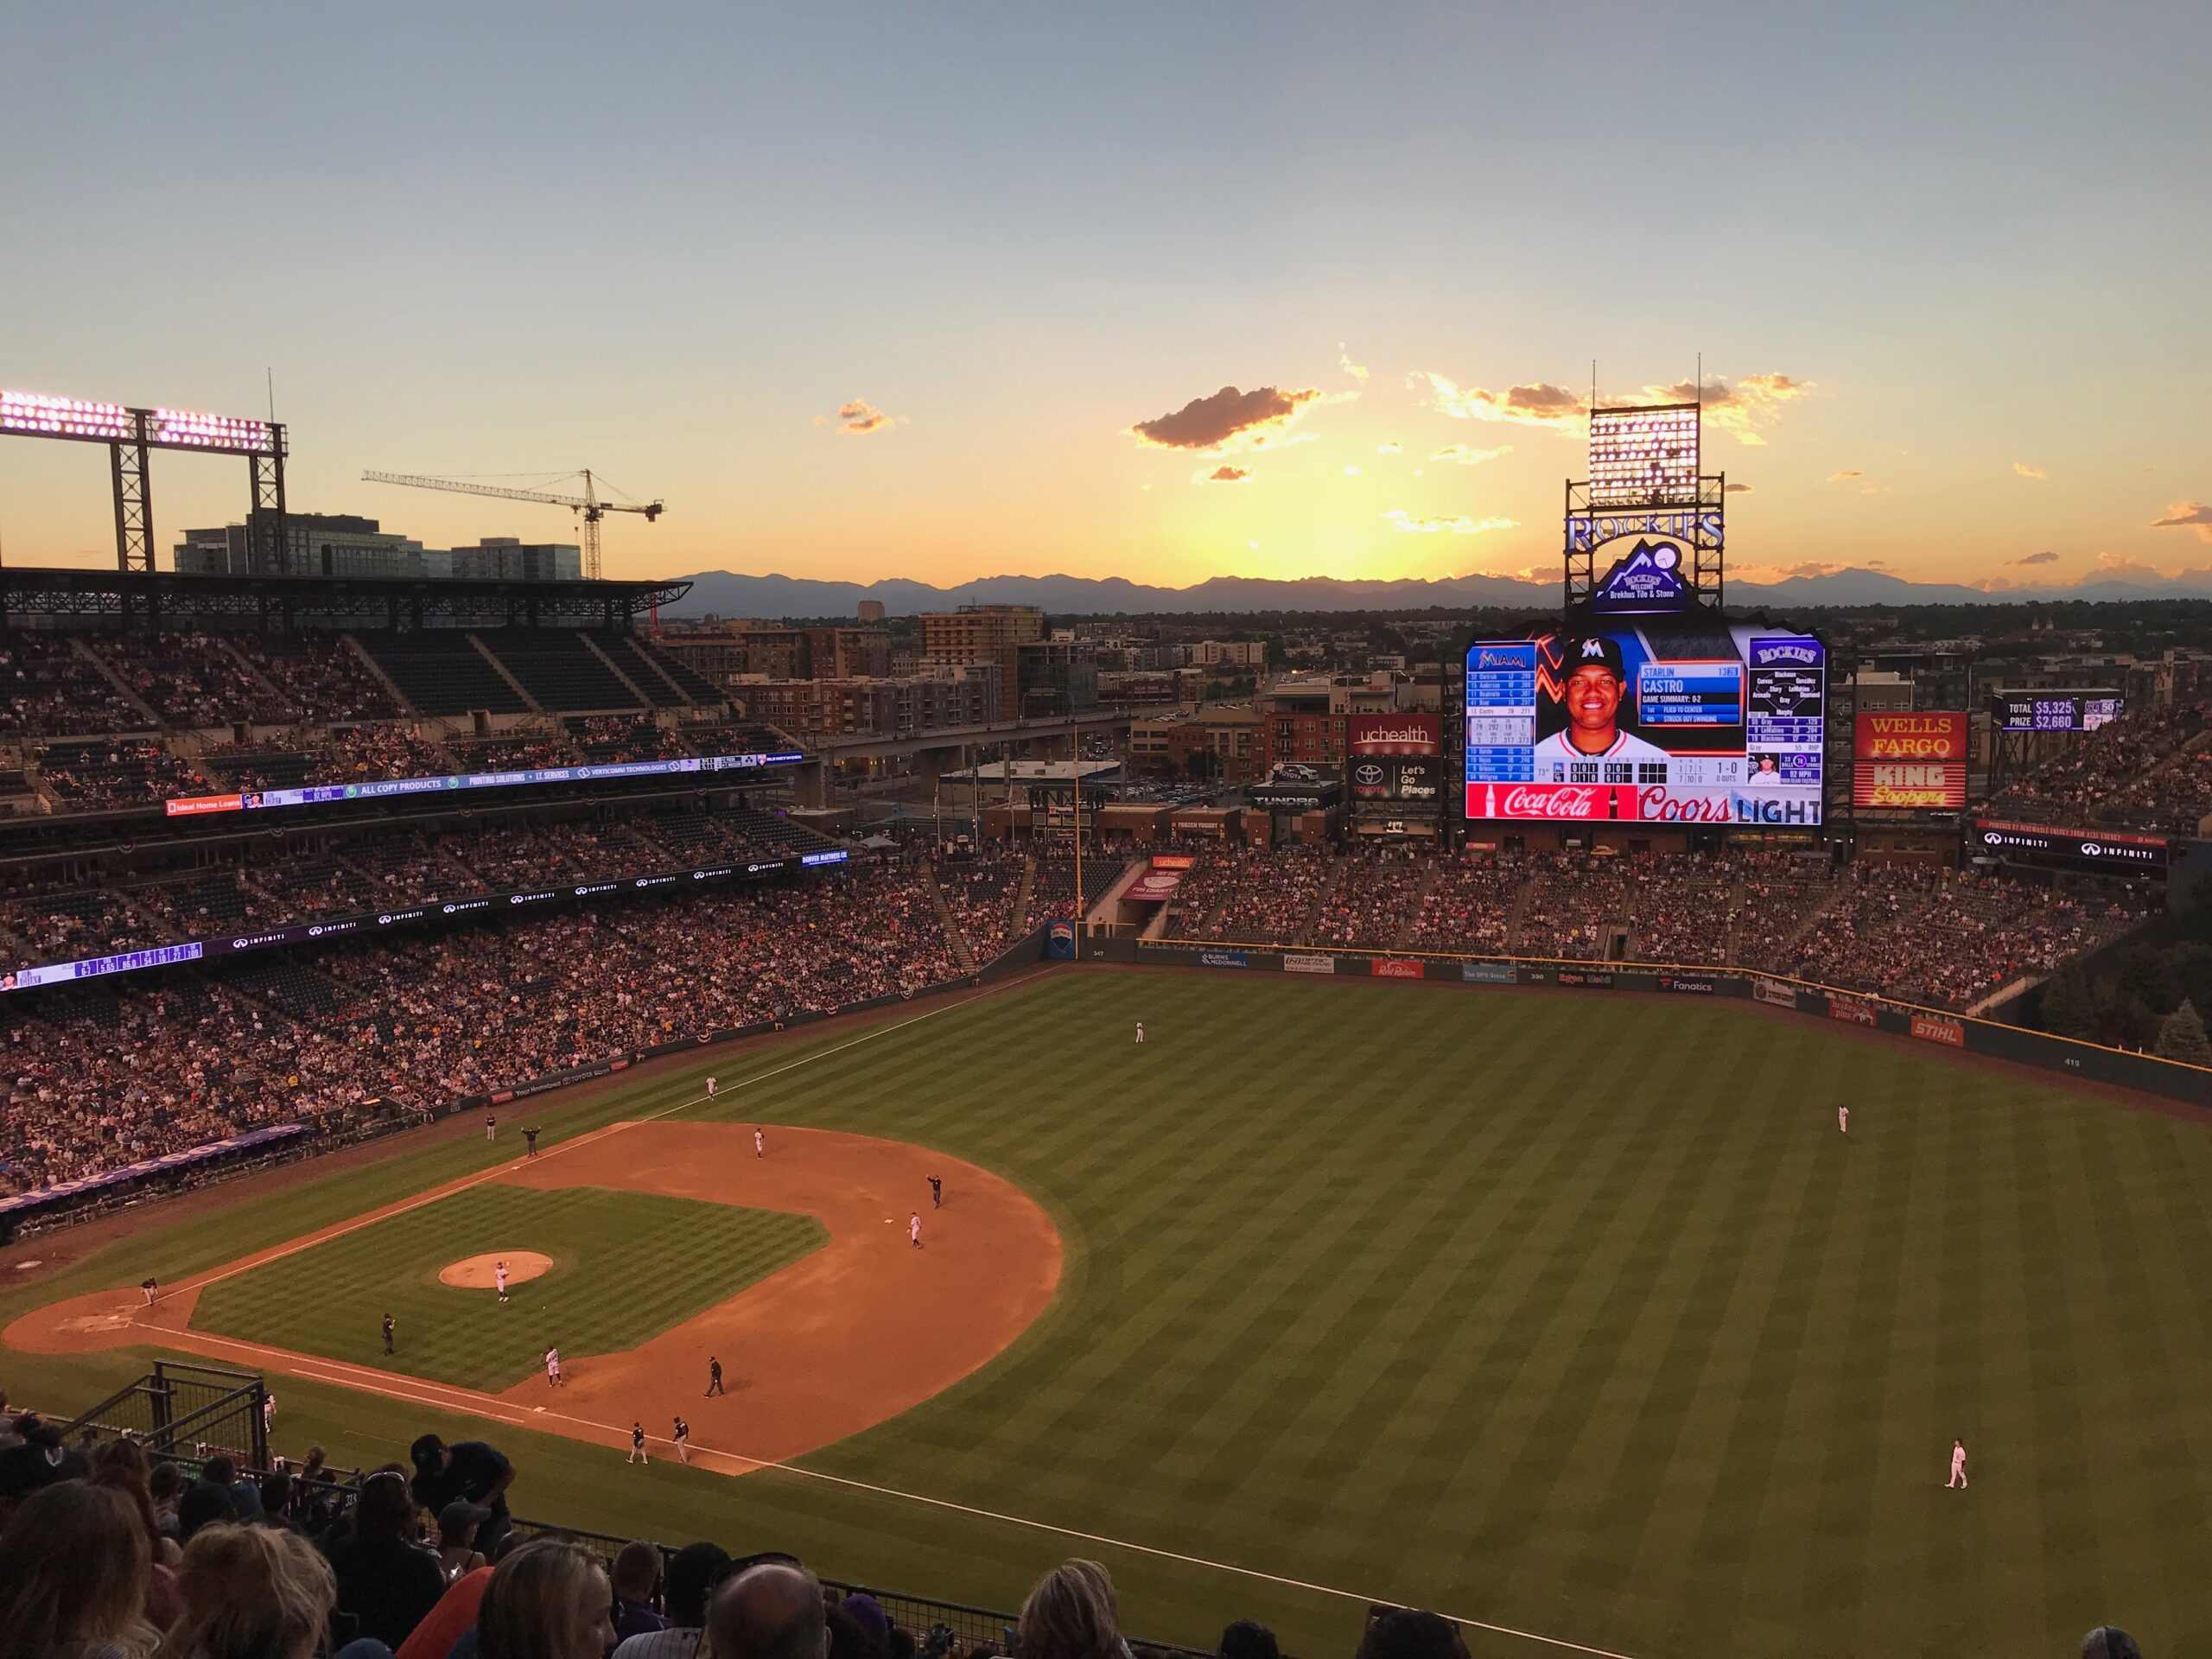 The Coors Field Problem. Why Coors Field is Bad for Baseball